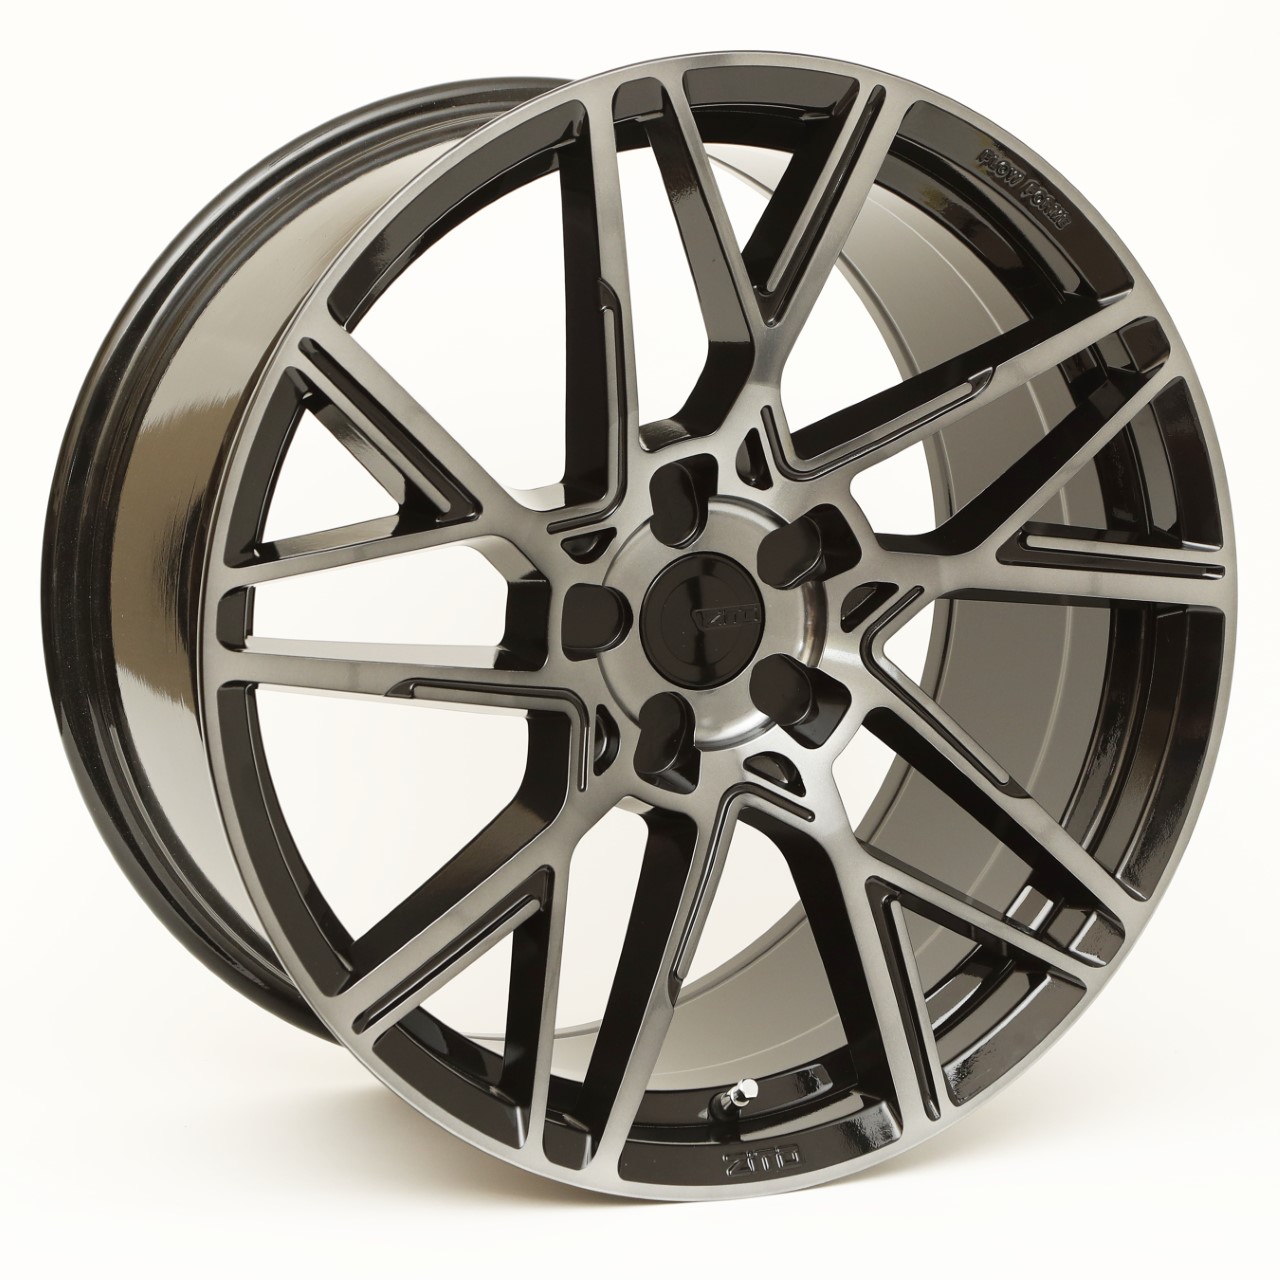 NEW 20  ZITO ZF X FLOW FORMED ALLOY WHEELS IN GLOSS BLACK WITH POLISHED FACE WITH DEEPER CONCAVE 10  REAR